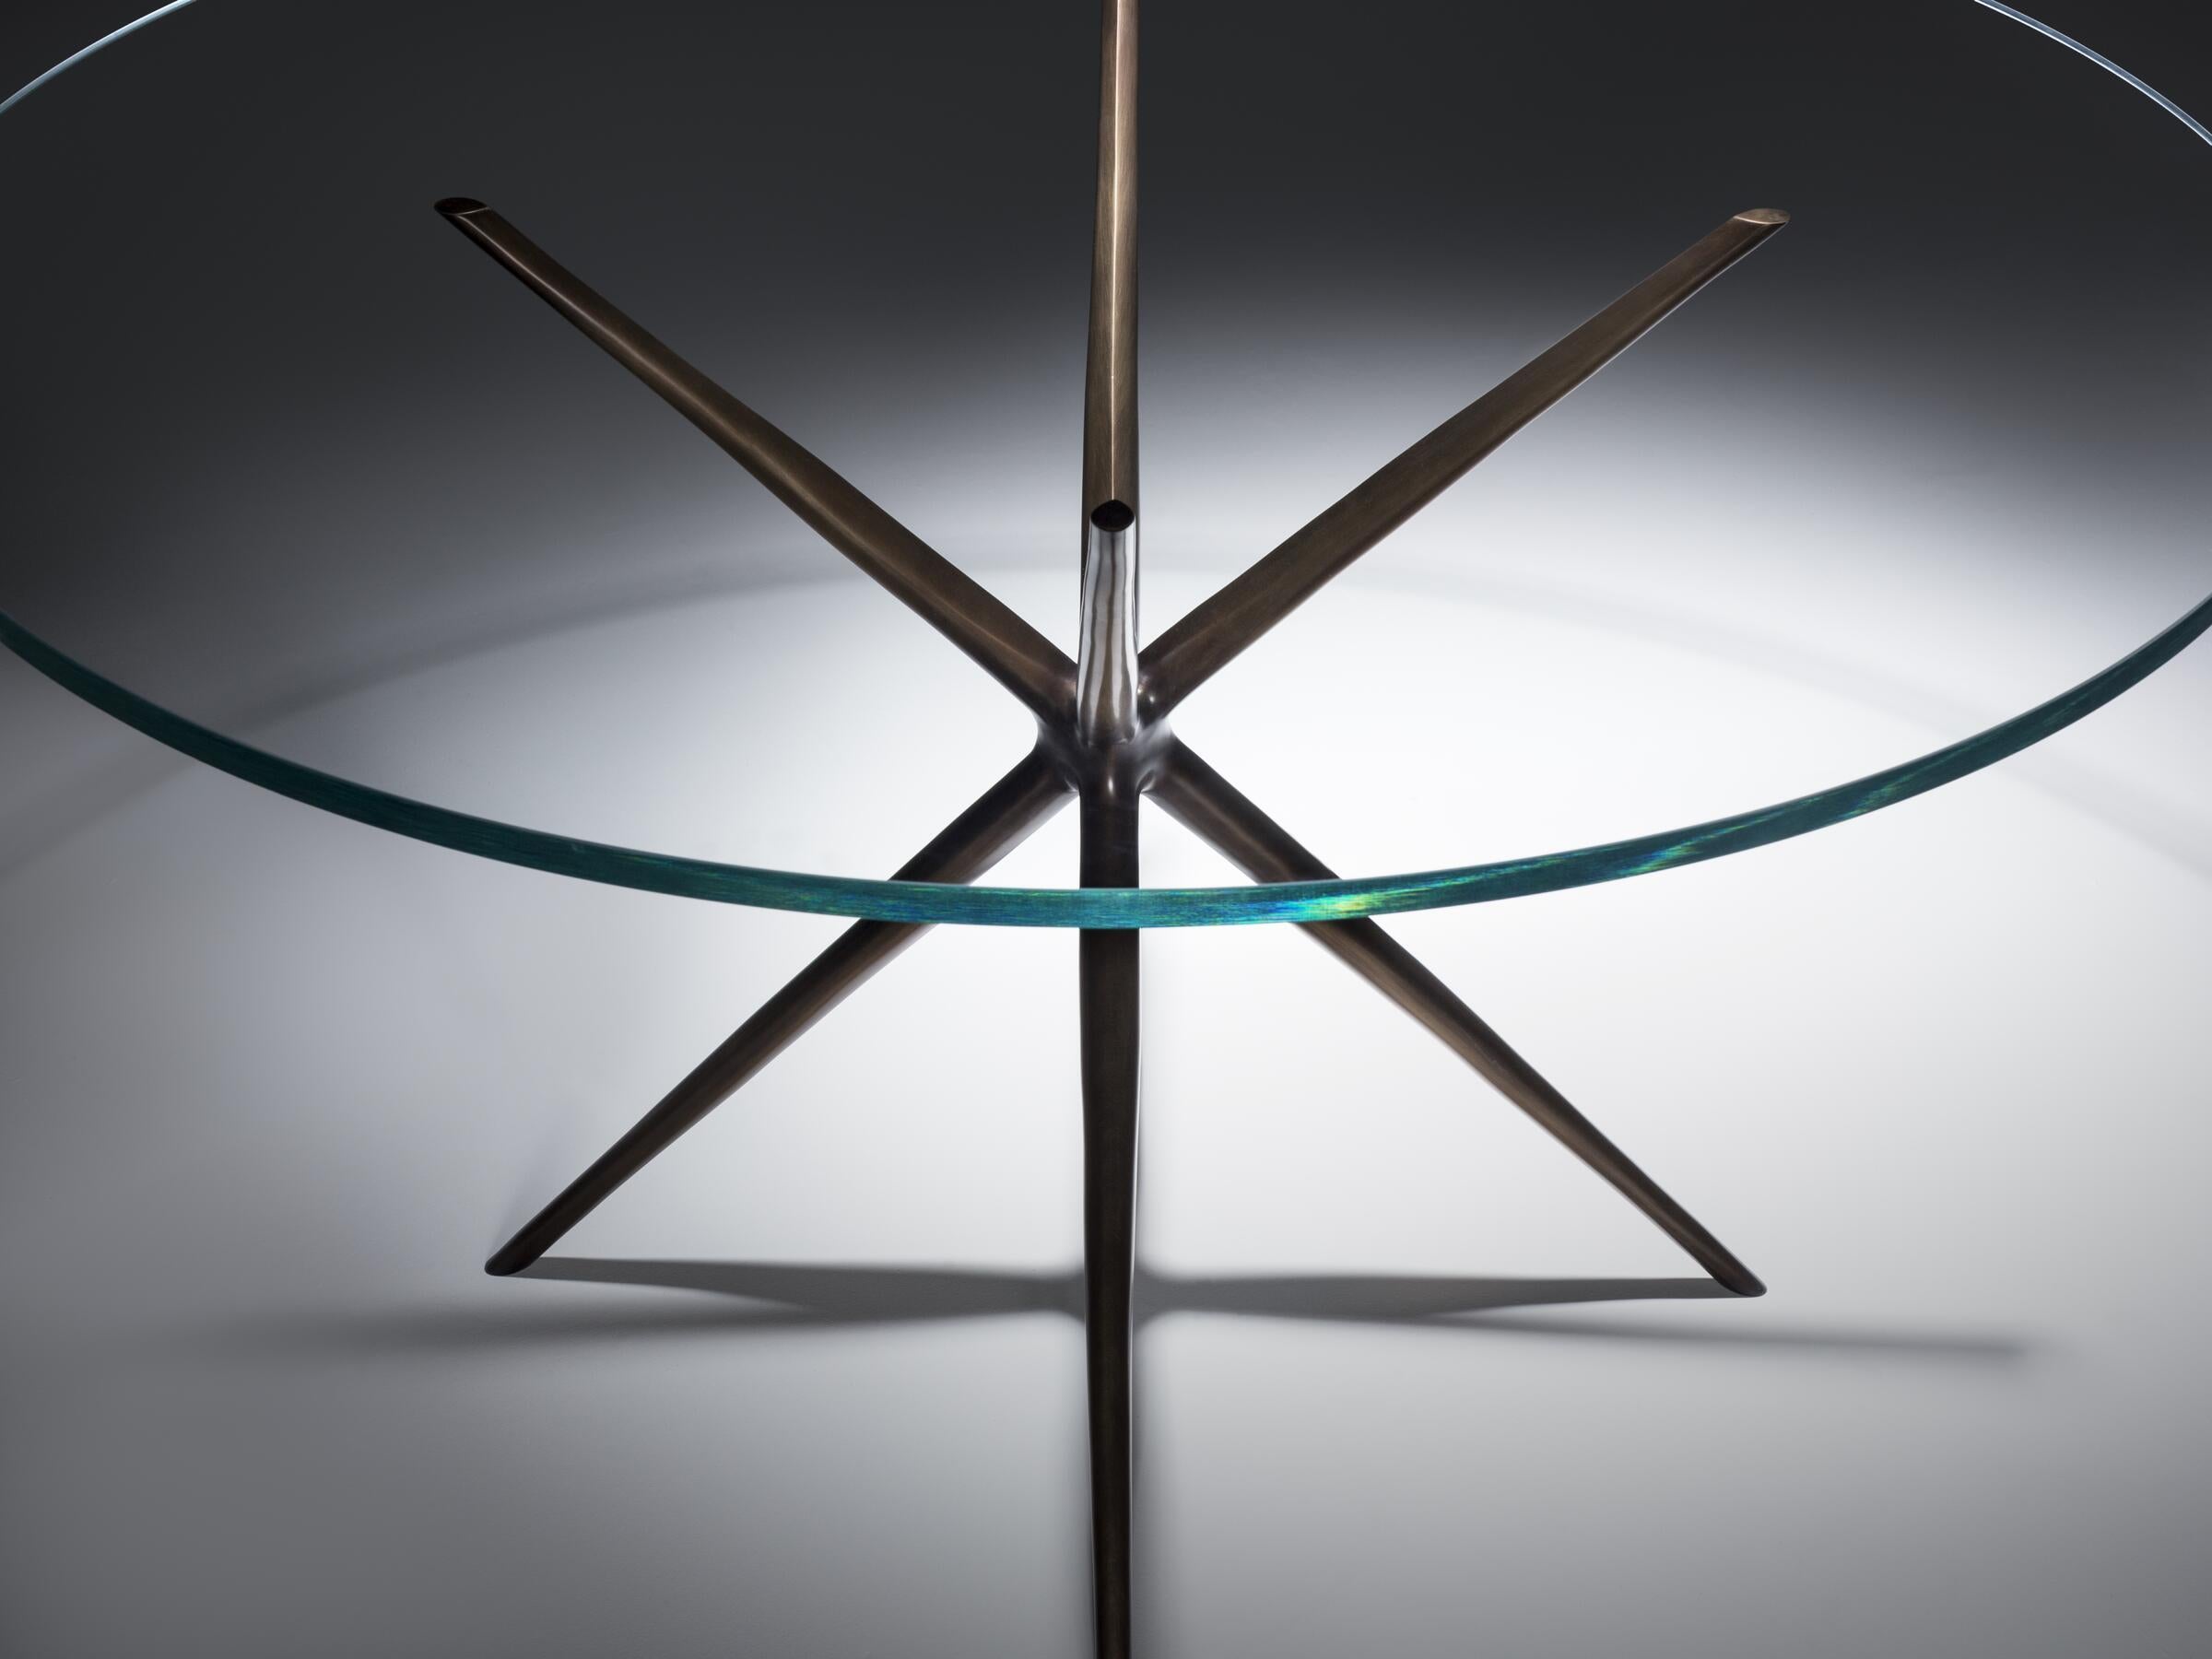 Designed by Paul Mathieu, the Etoile Dining Table is defined by its sculptural starburst base. Made of cast-bronze, it has a gorgeous surface texture that contrasts with its clean-lined glass top. Dynamic yet simple, the table is a boldly minimalist